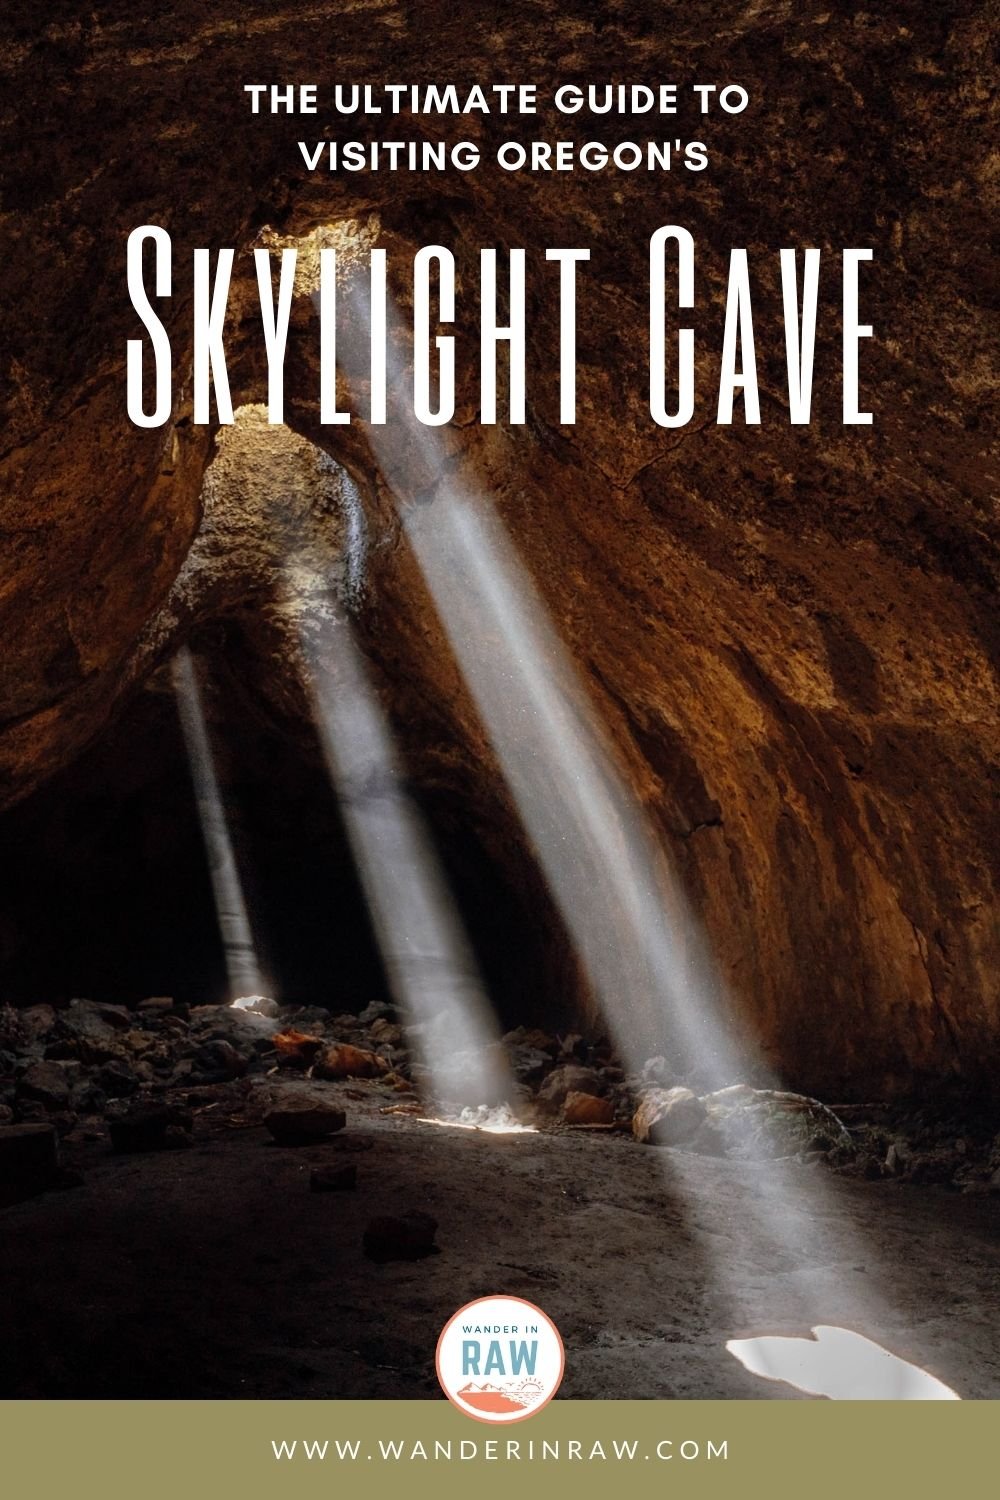 How to Visit the Skylight Cave in Oregon